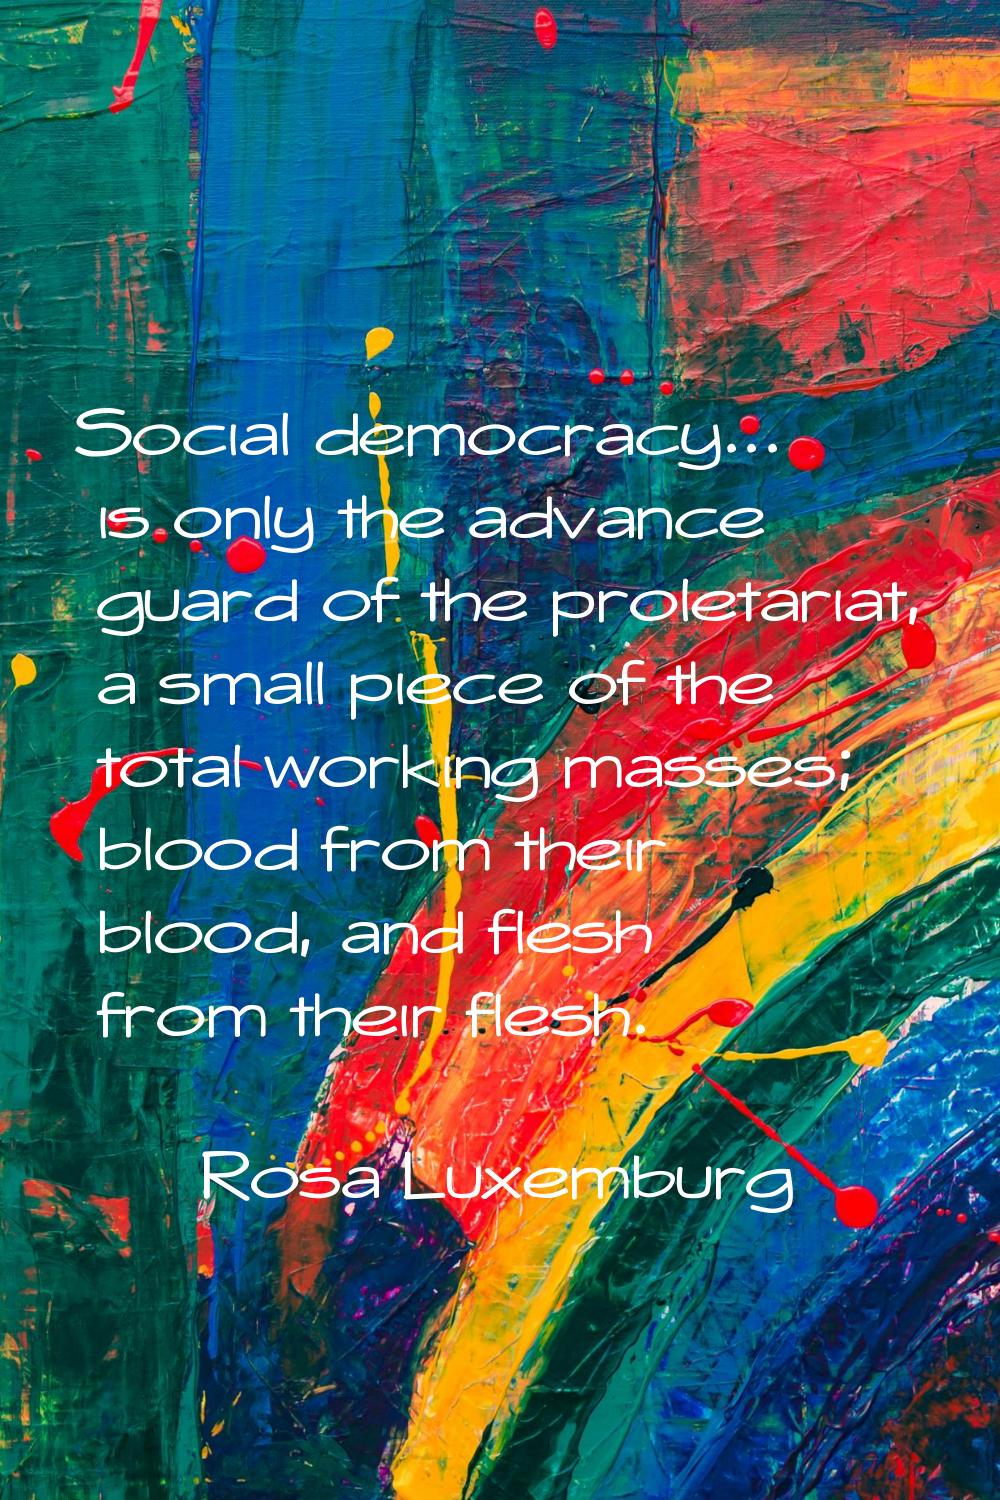 Social democracy... is only the advance guard of the proletariat, a small piece of the total workin